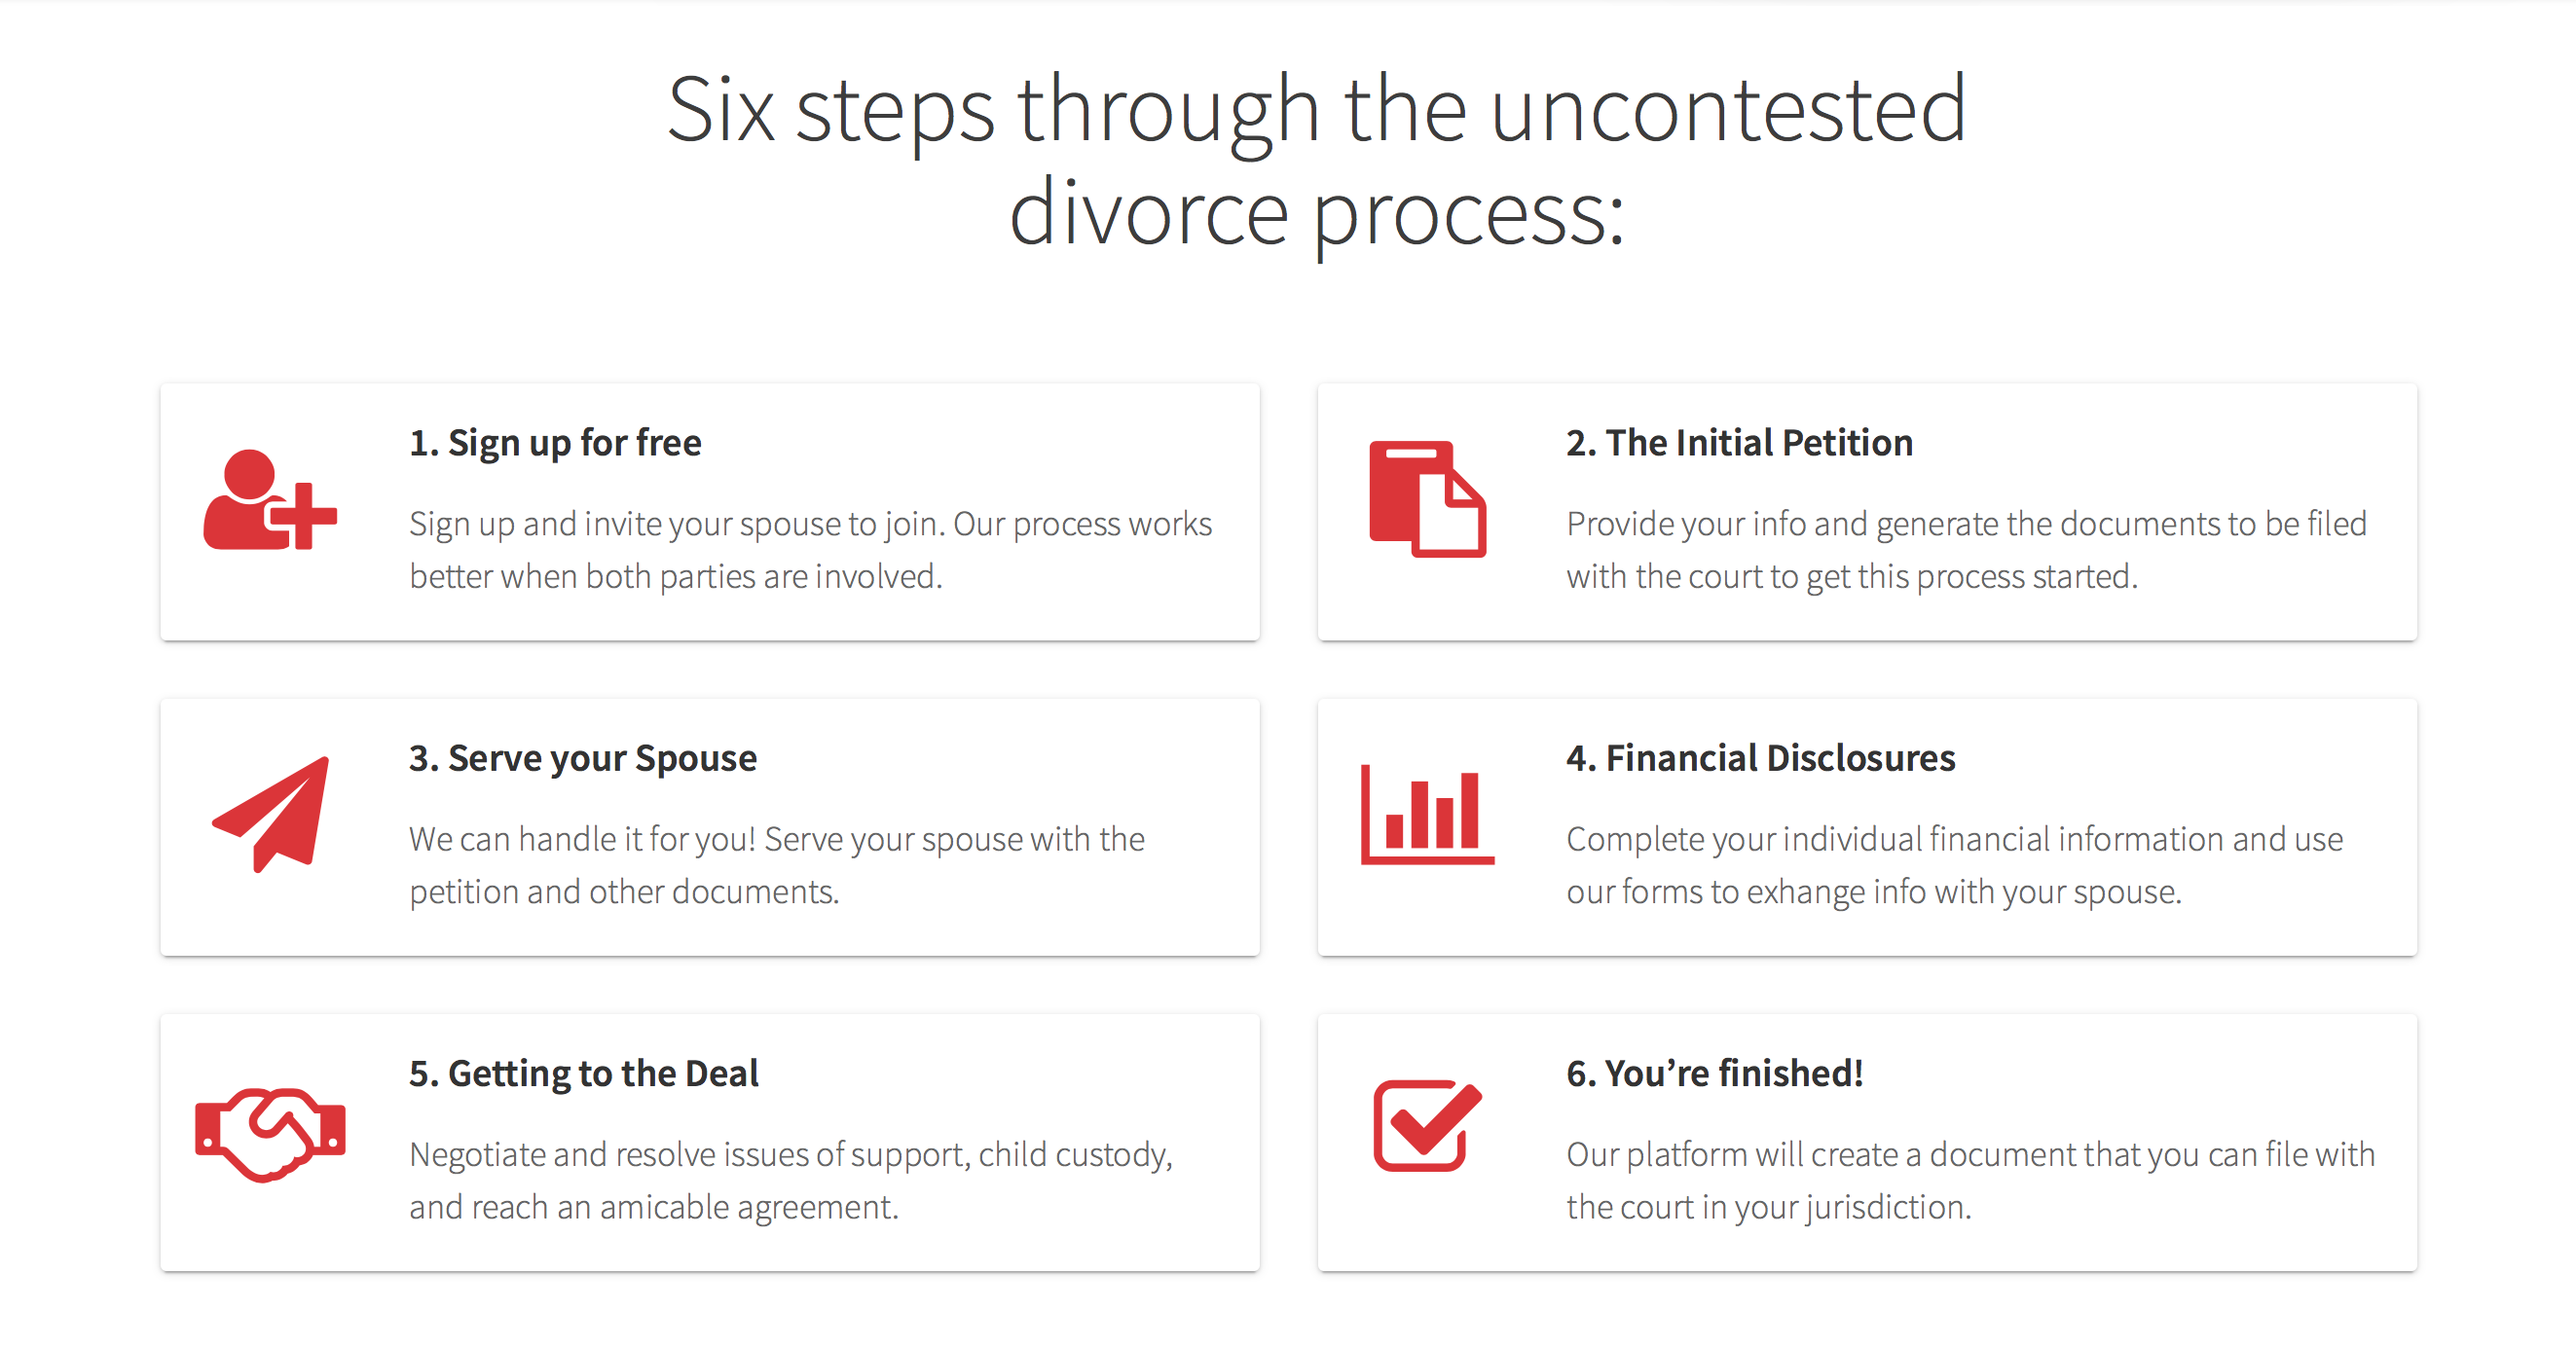 Let’s Untie the Knot guides users through six simple steps of the uncontested divorce process.